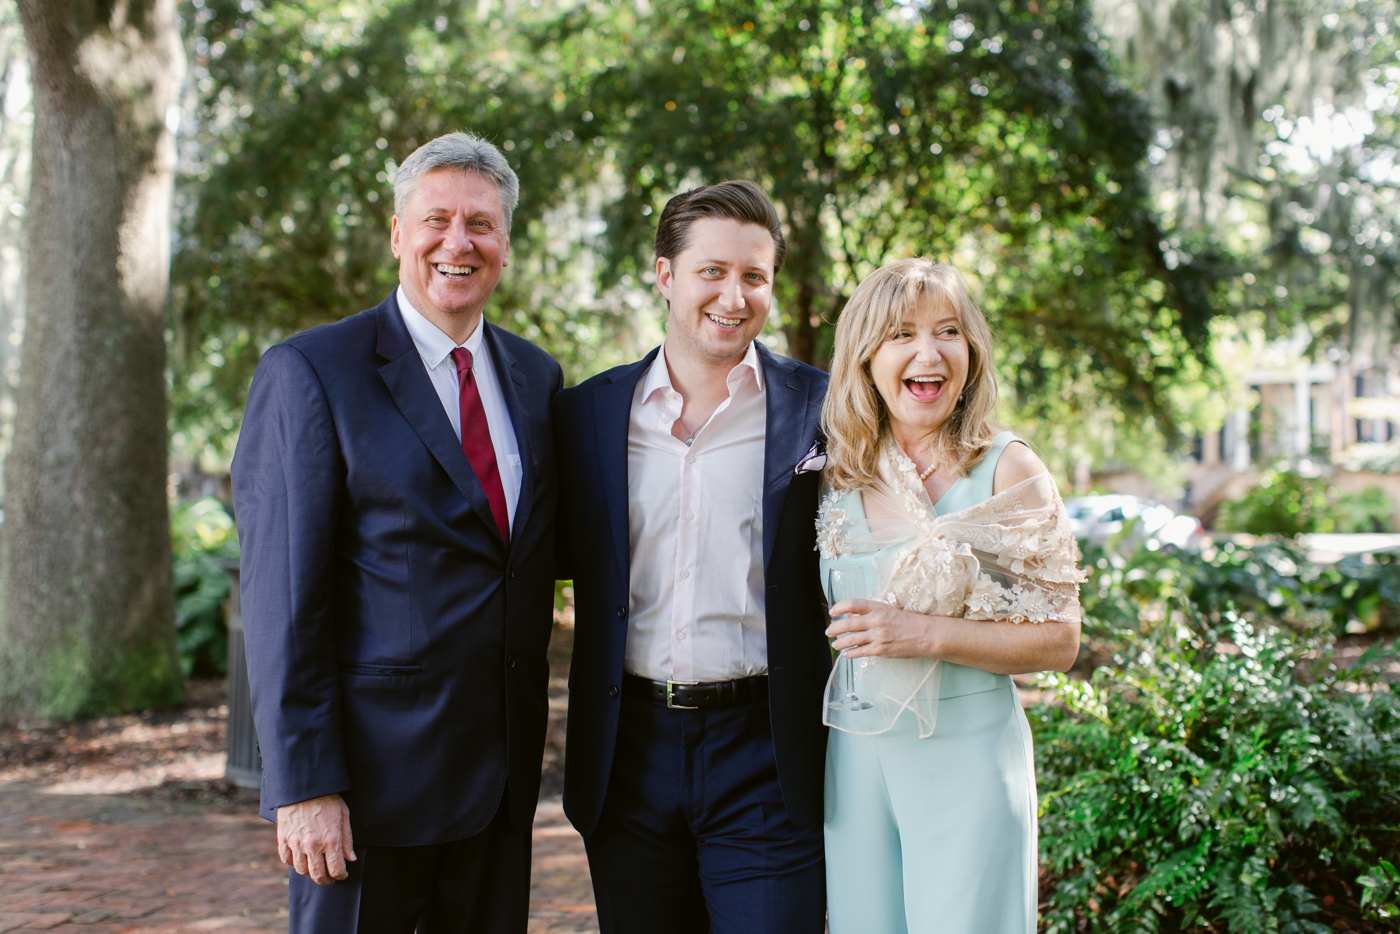 Family portraits after an elopement in Lafayette Square